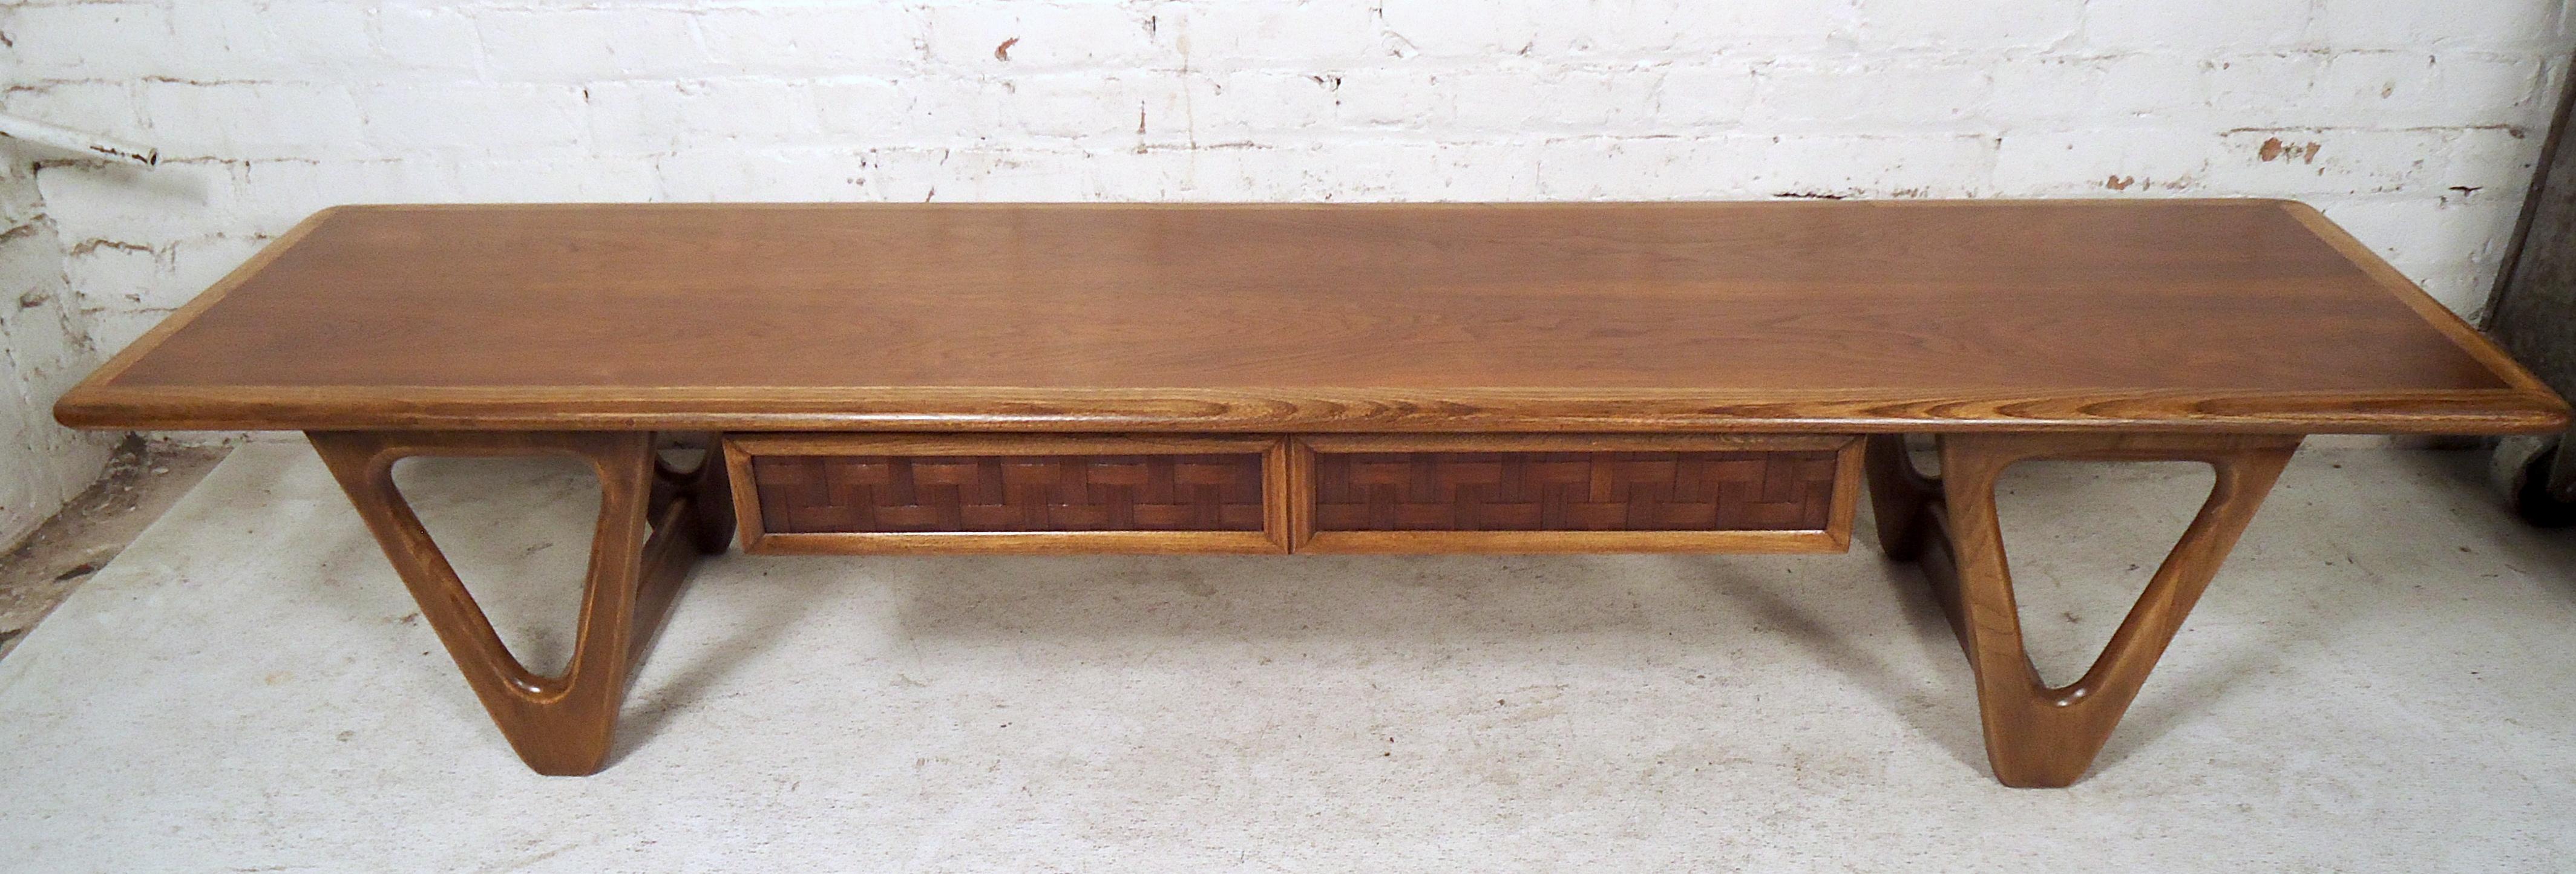 Stylish midcentury coffee table by Lane Furniture Company, circa 1960s. Ample table surface area, uniquely sculpted legs, one drawer under the tabletop with an interesting woven pattern on the drawer-front.
Please confirm item location with dealer